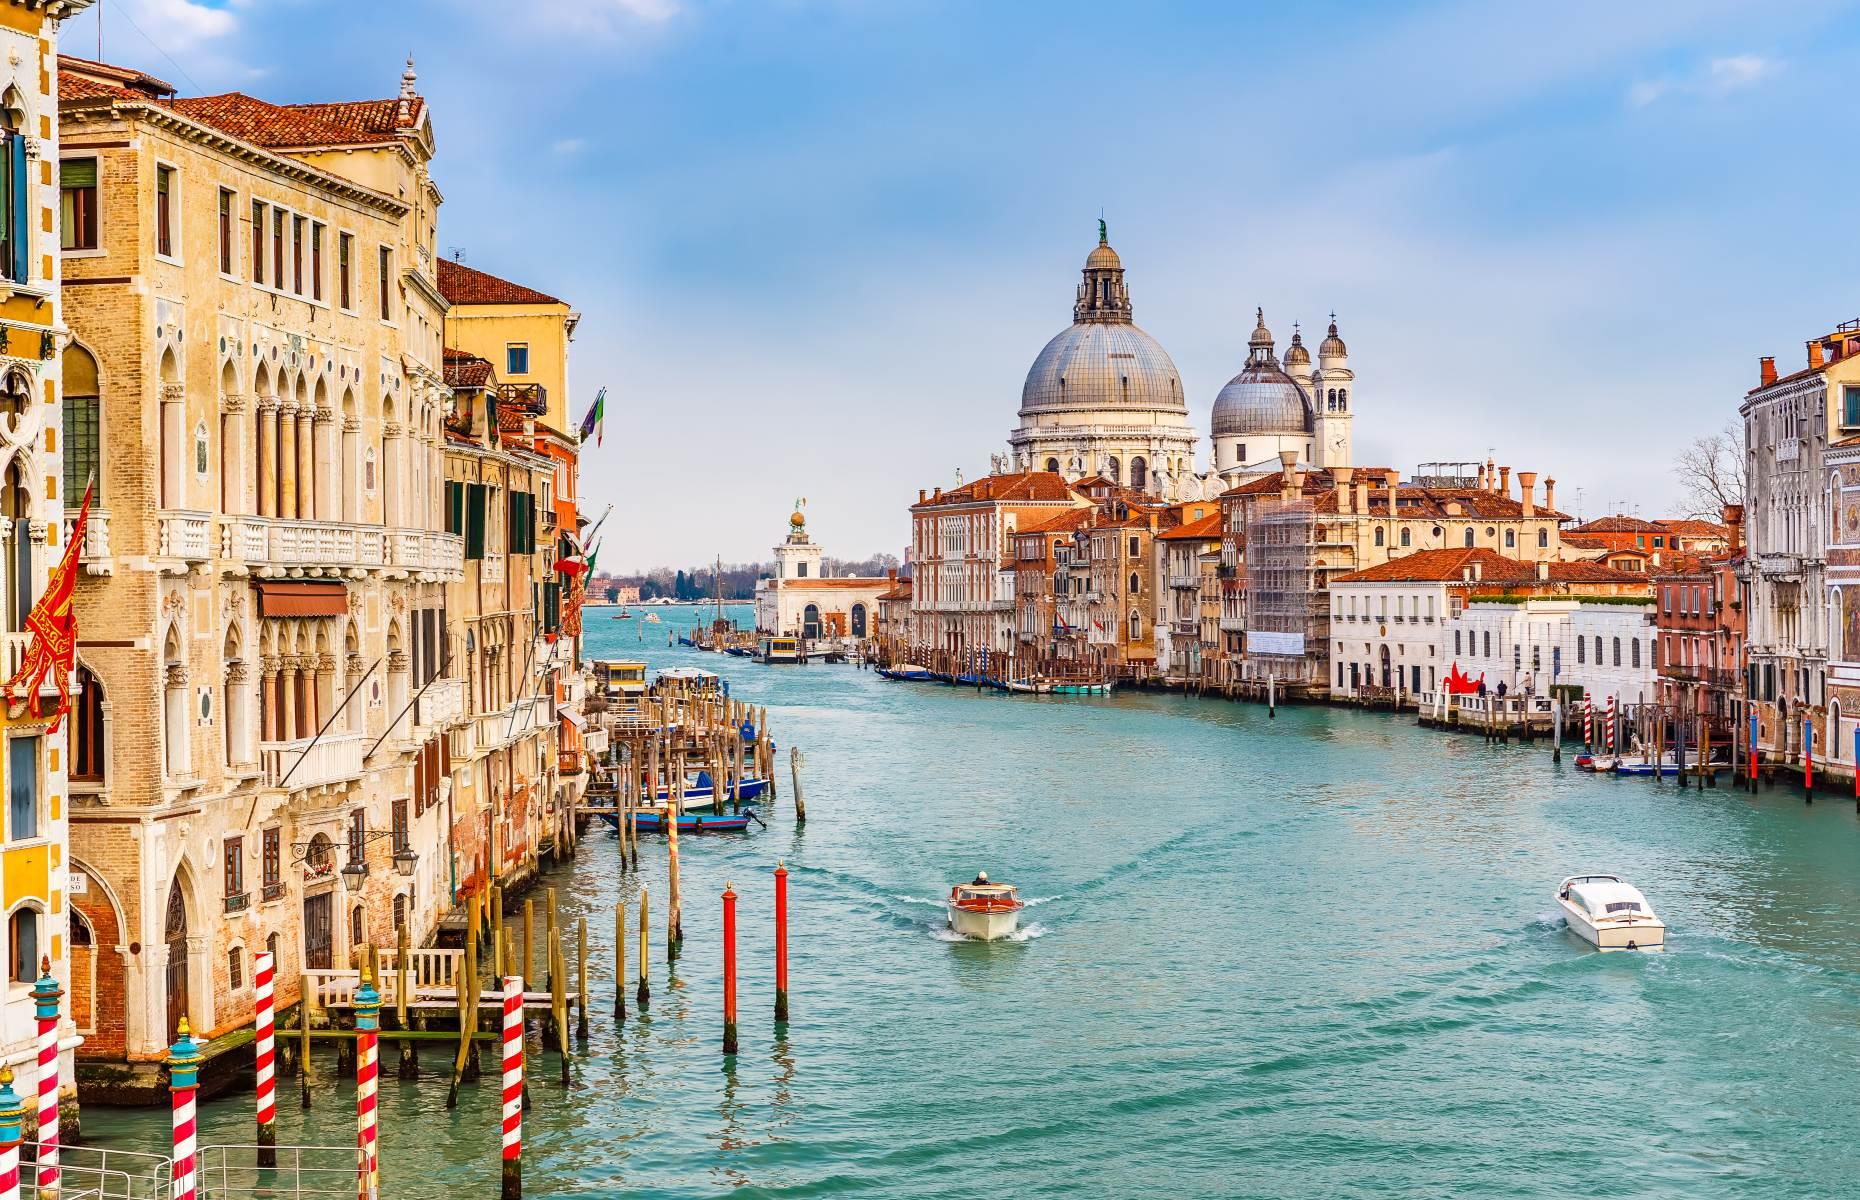 <p>Probably the most famous waterway of them all, <a href="https://www.loveexploring.com/guides/84377/explore-venice-top-things-to-see-and-do-best-hotels-and-where-to-eat">Venice</a>’s Grand Canal snakes through the heart of the famous floating city. The canal functions as the city’s main transportation source as the use of automobiles is strictly prohibited. At just over two miles (3km), the Grand Canal is like the main artery of Venice, separating it into two, and is surrounded by some of the city’s most famous landmarks. Crossing the water, the lavish Rialto Bridge is one of the main attractions, completed in 1591, it is the canal's oldest bridge.</p>